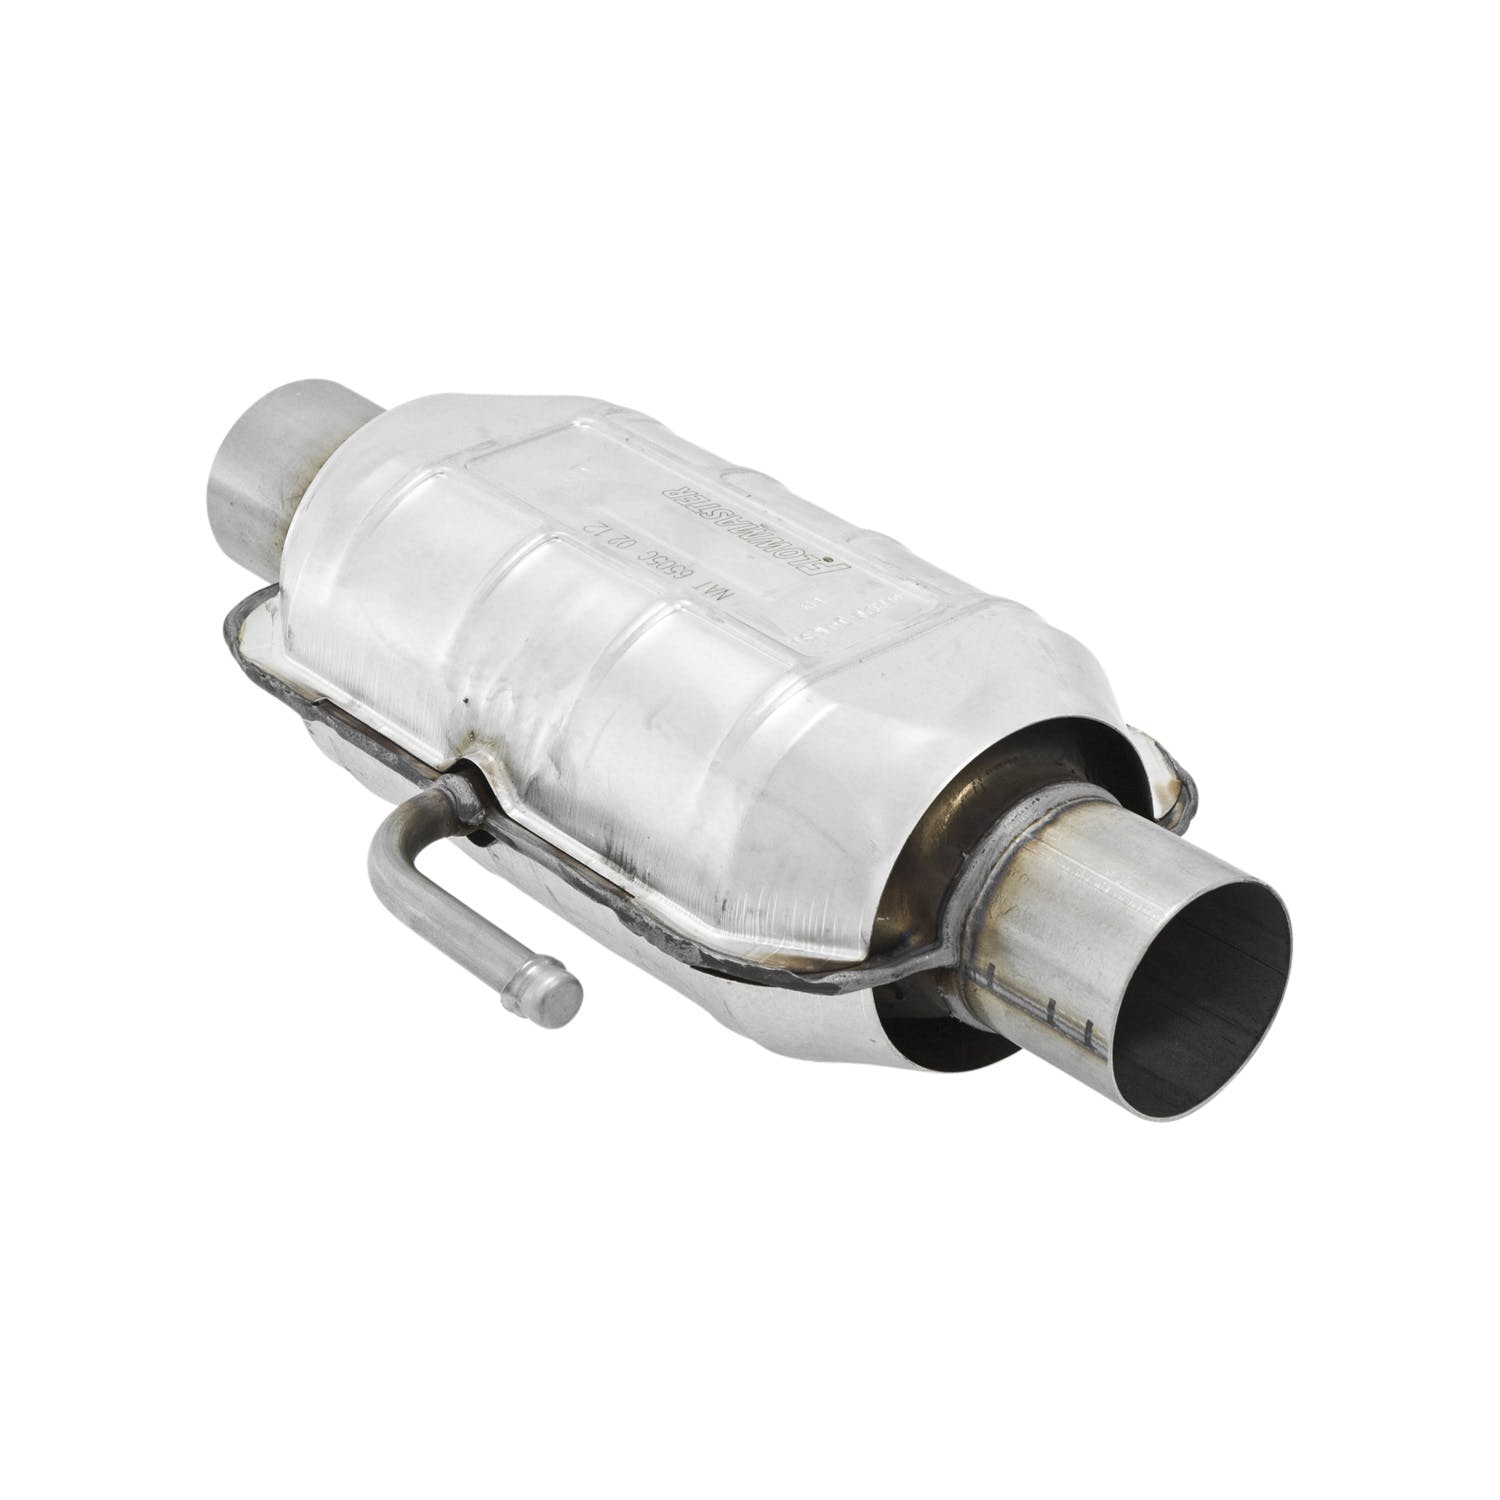 Flowmaster Catalytic Converters 2200124 Catalytic Converter-Universal-220 Series-2.25 in. Inlet/Outlet-49 State